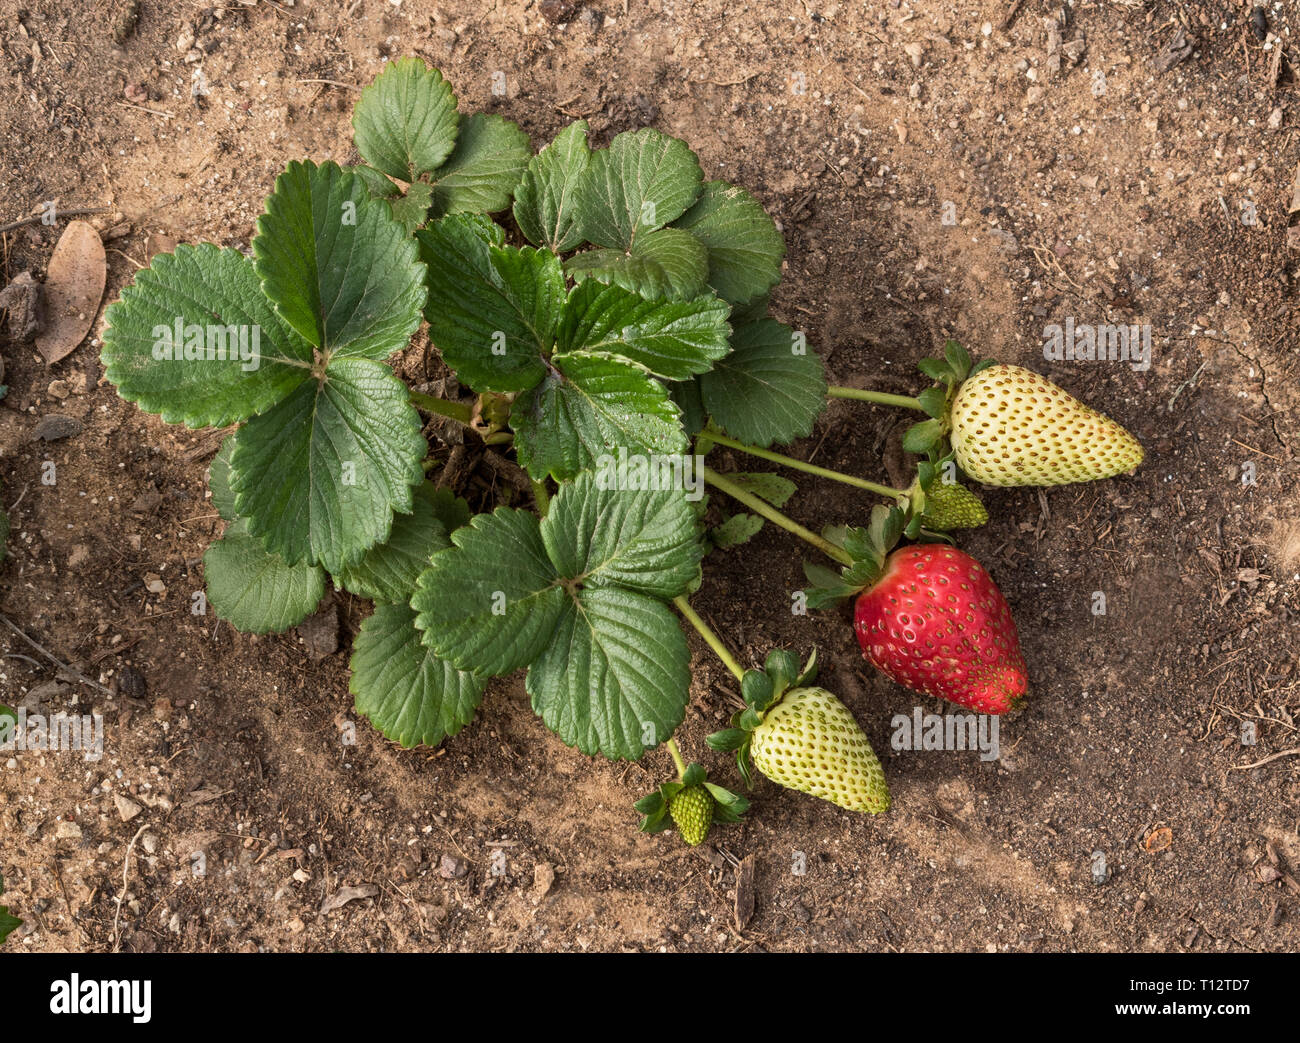 a strawberry plant with one ripe and three green strawberries side by side on a natural soil background Stock Photo